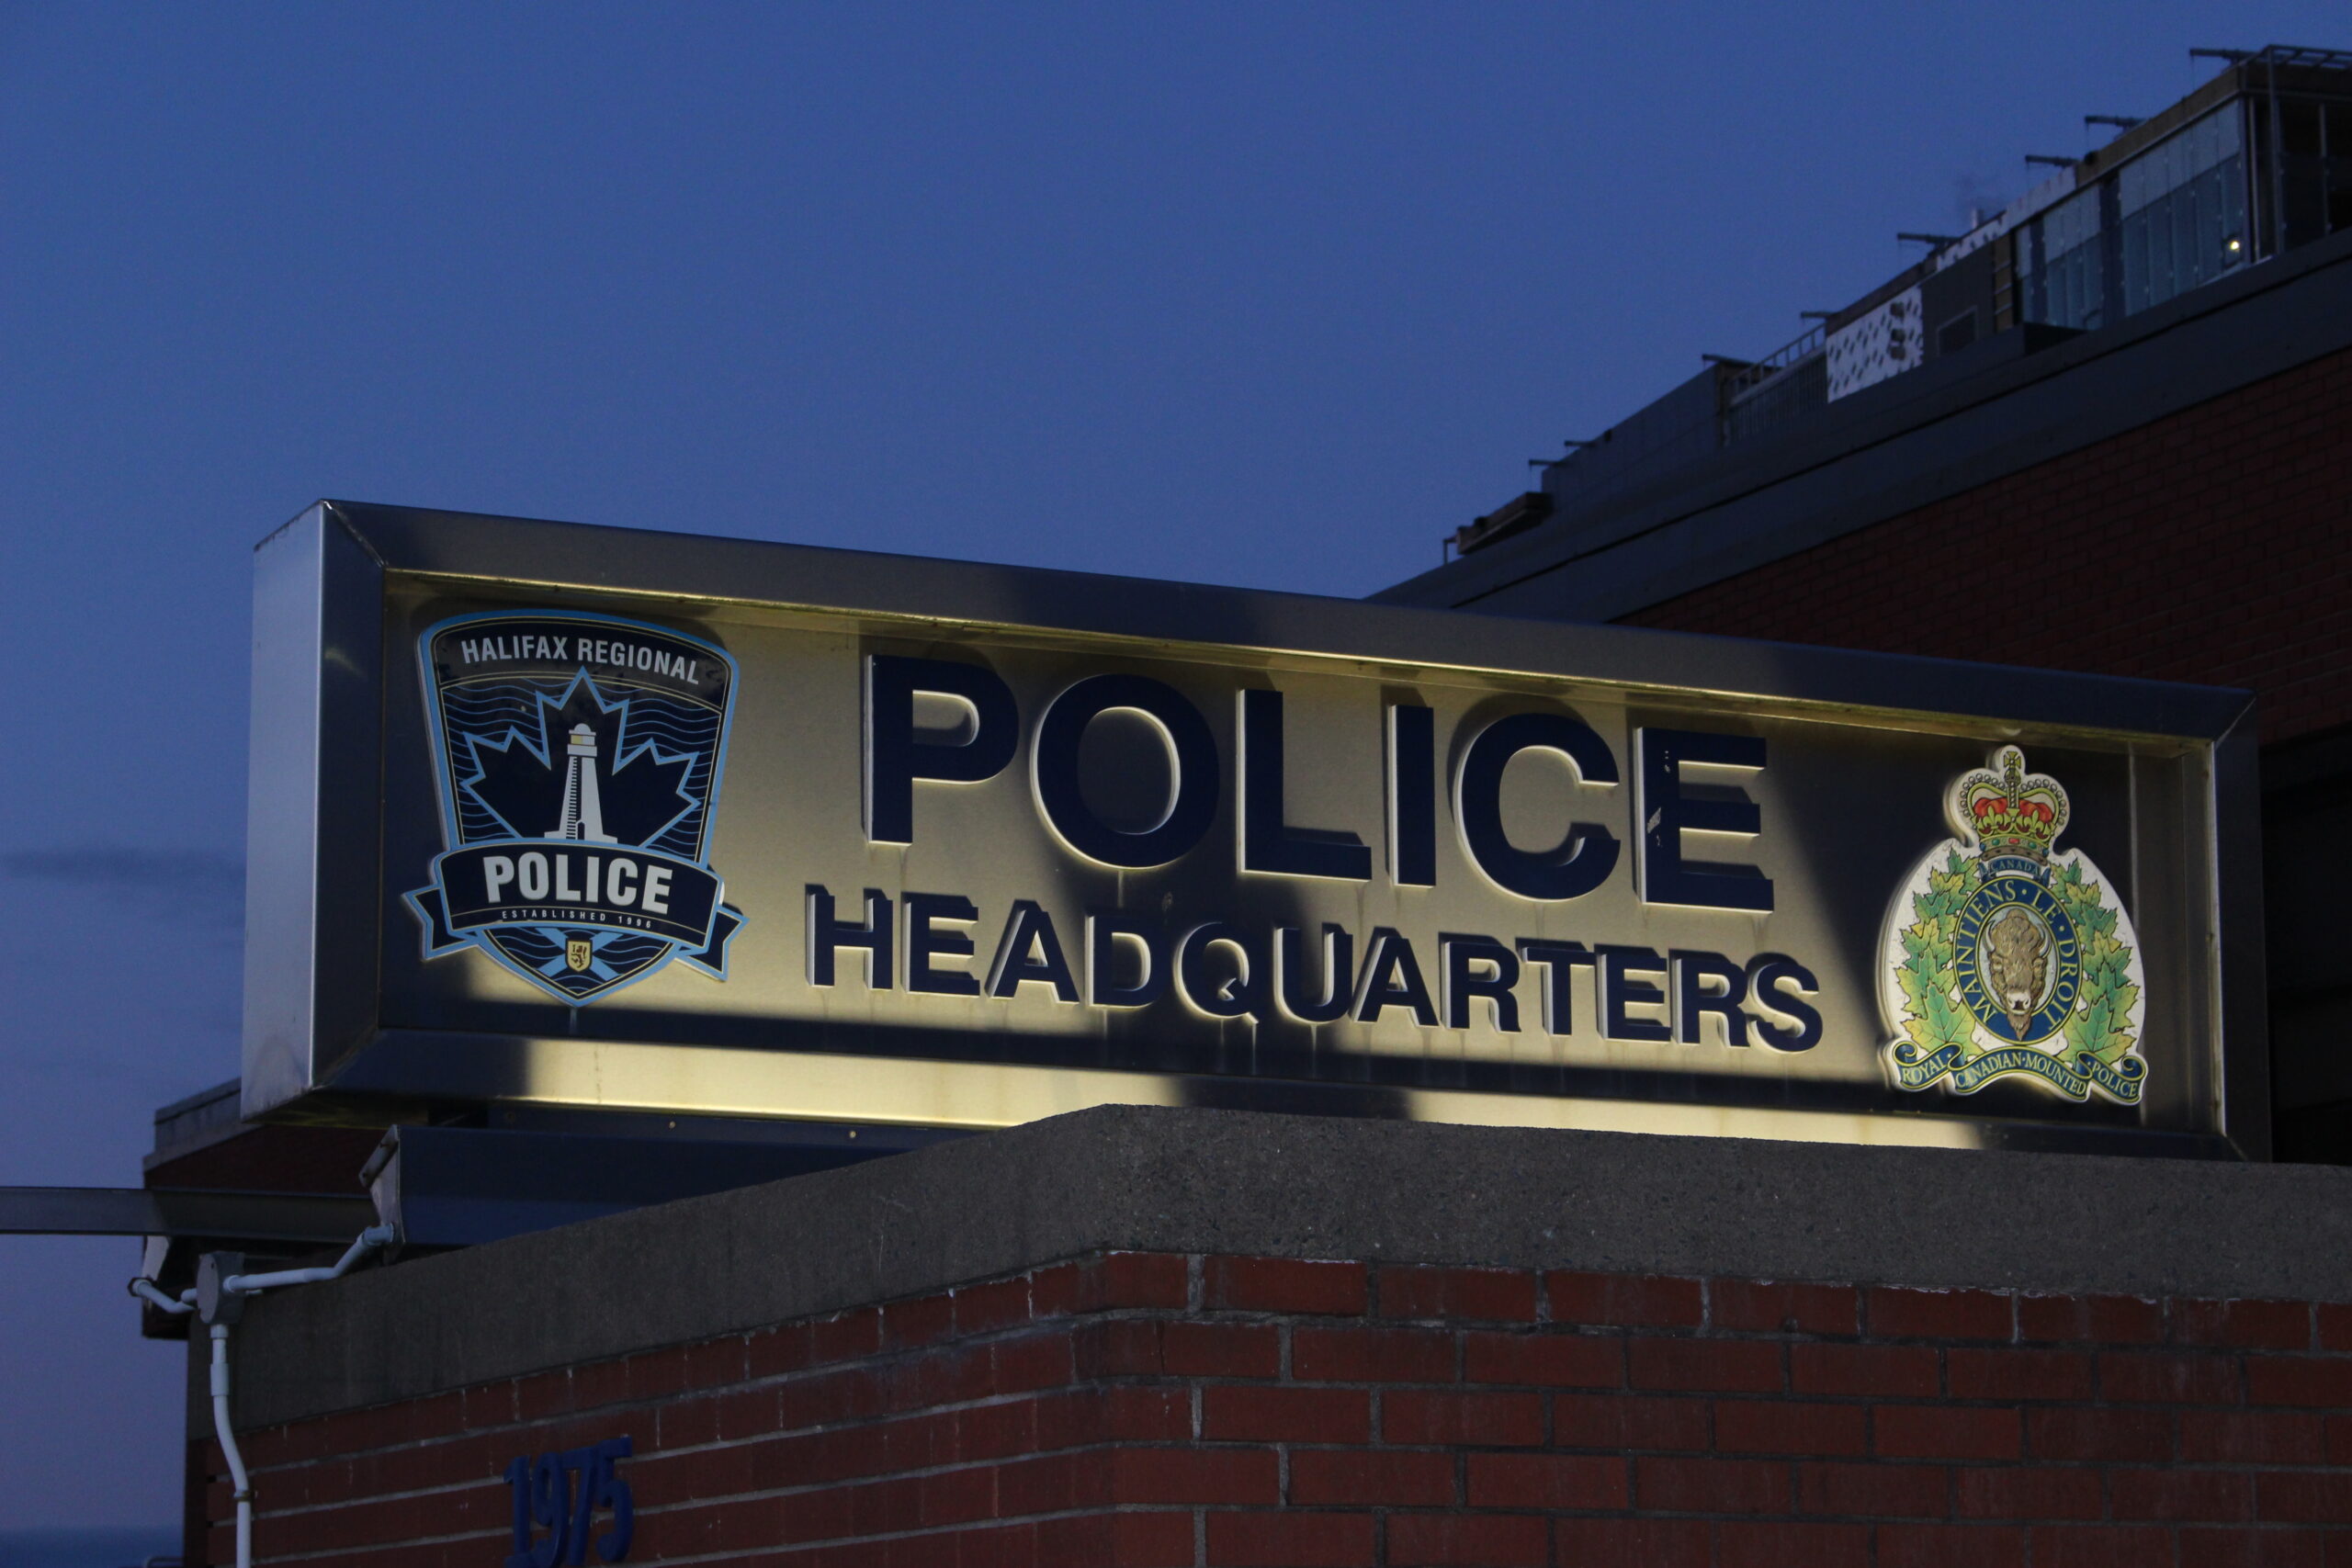 The Halifax regional police headquarters sign.